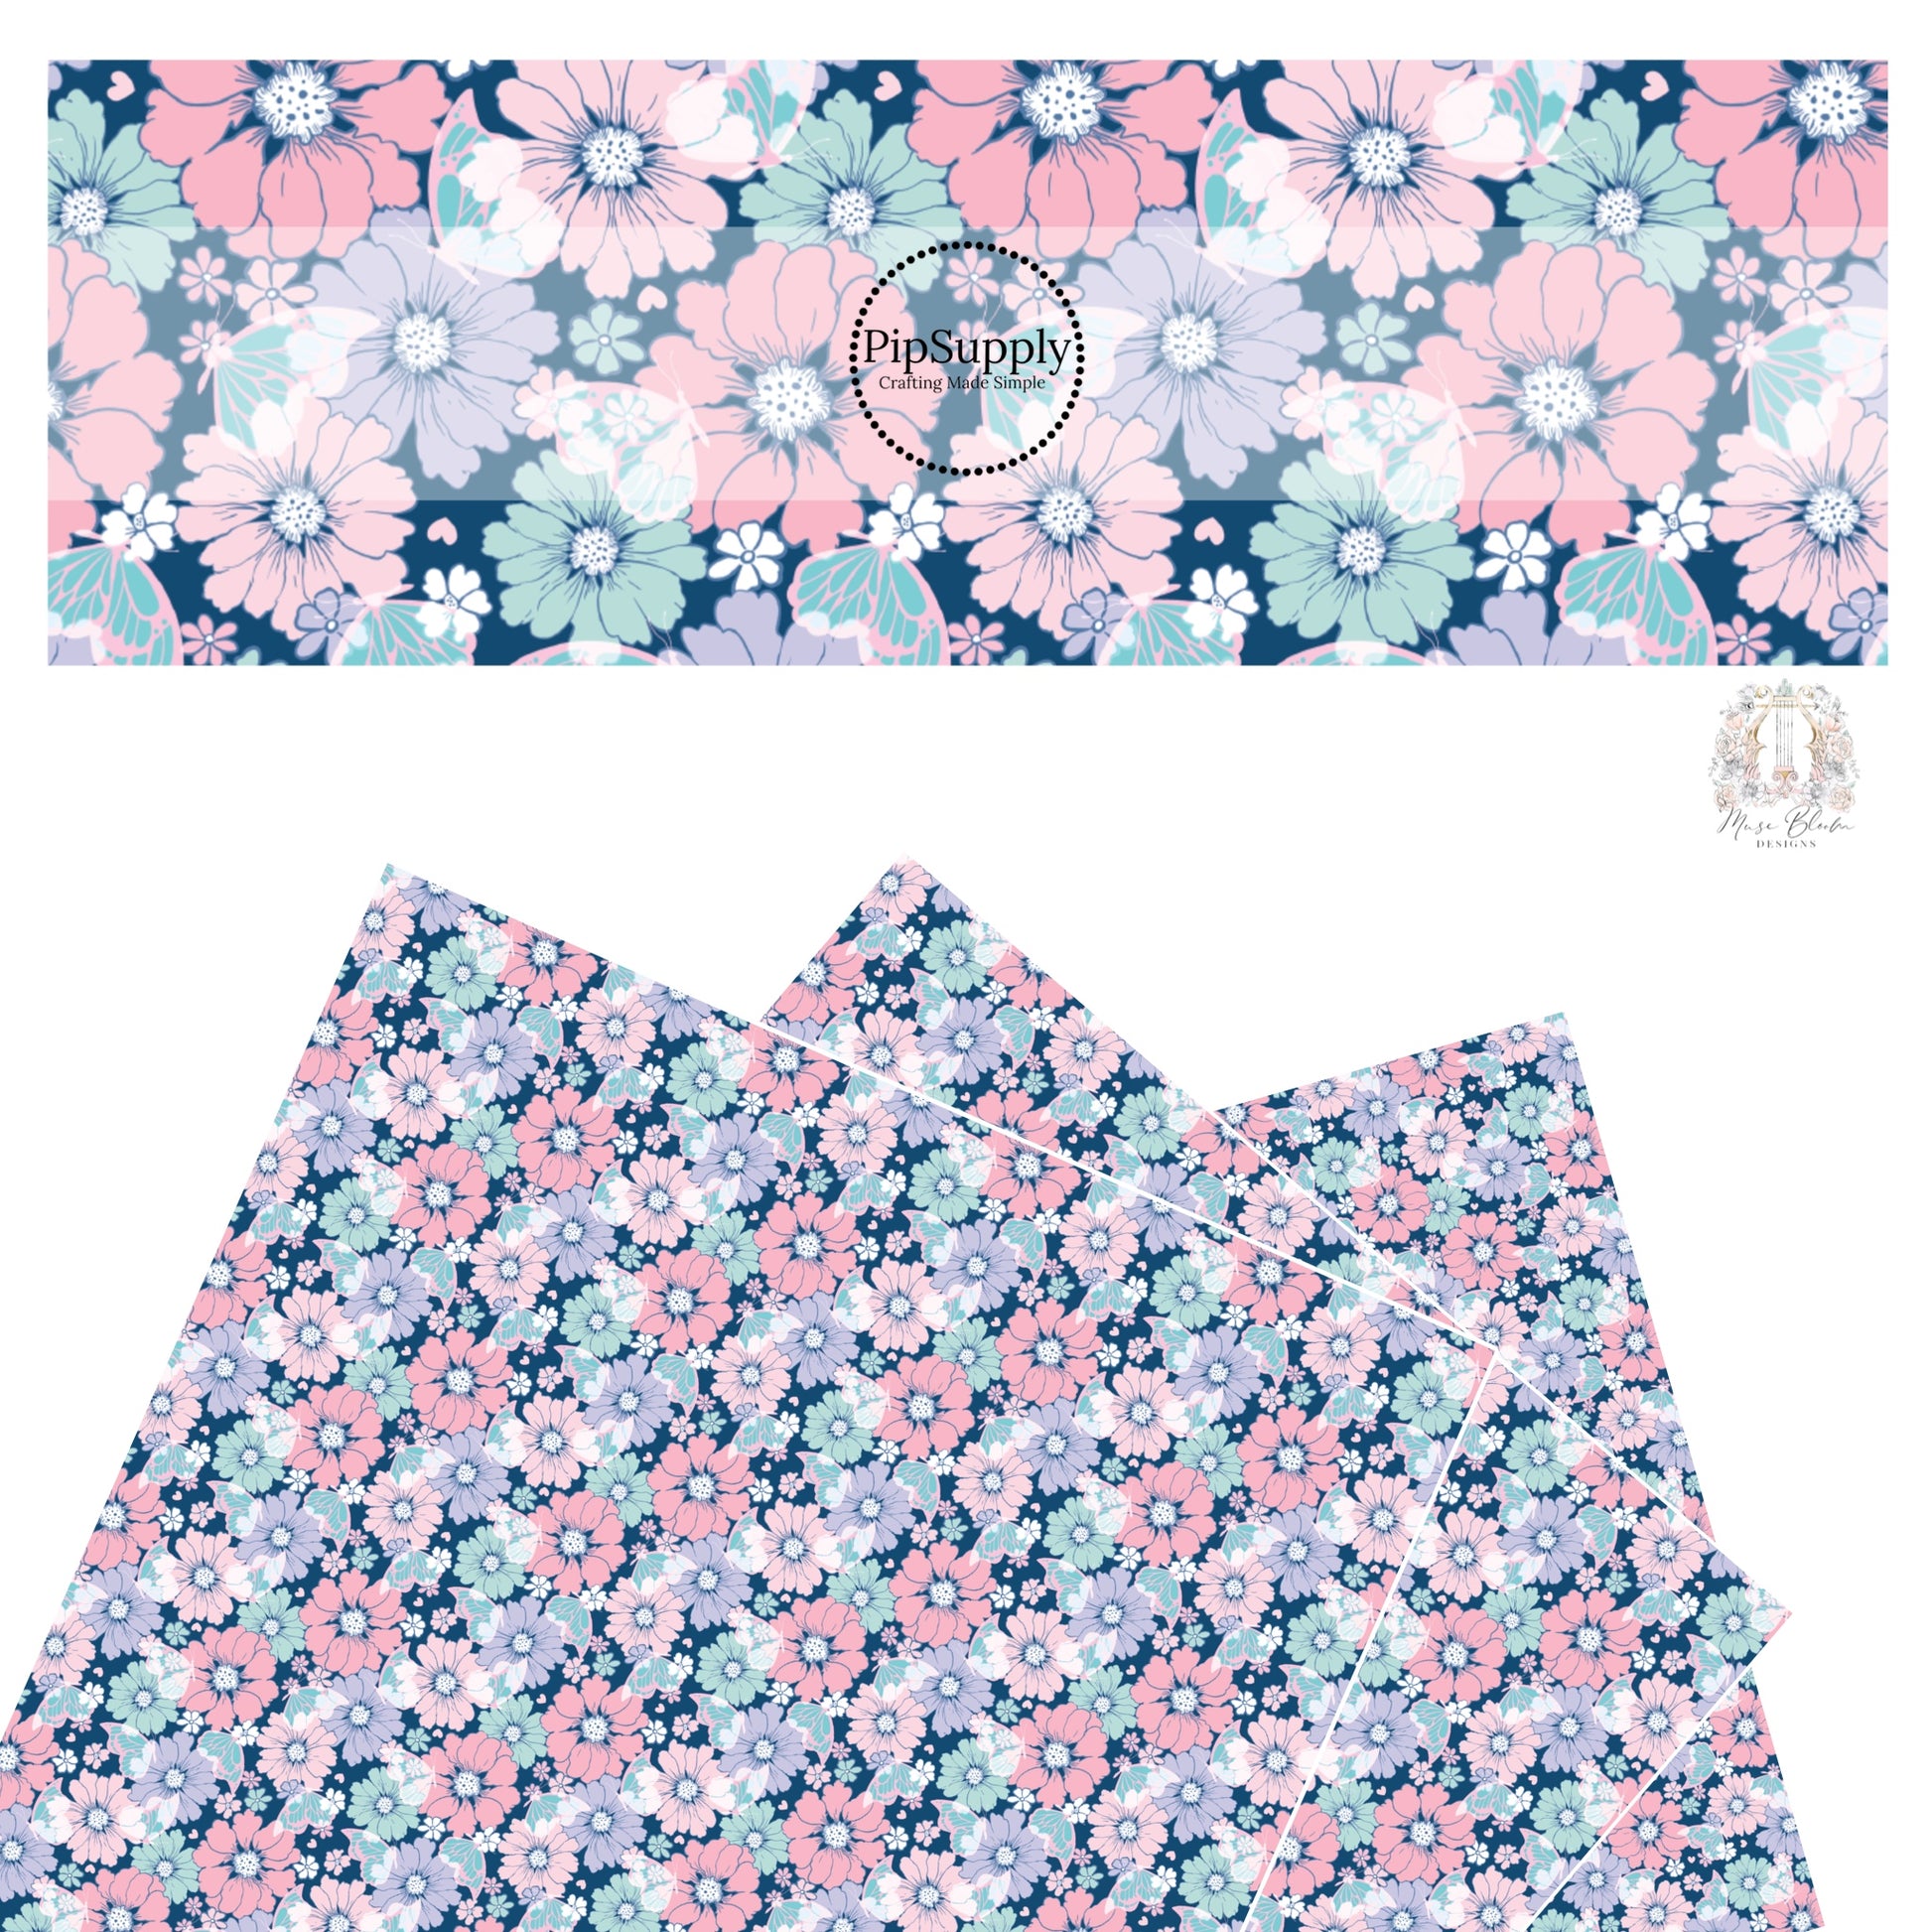 Pastel flowers in pink, aqua, purple, and white with aqua butterflies on dark navy blue faux leather sheet. 